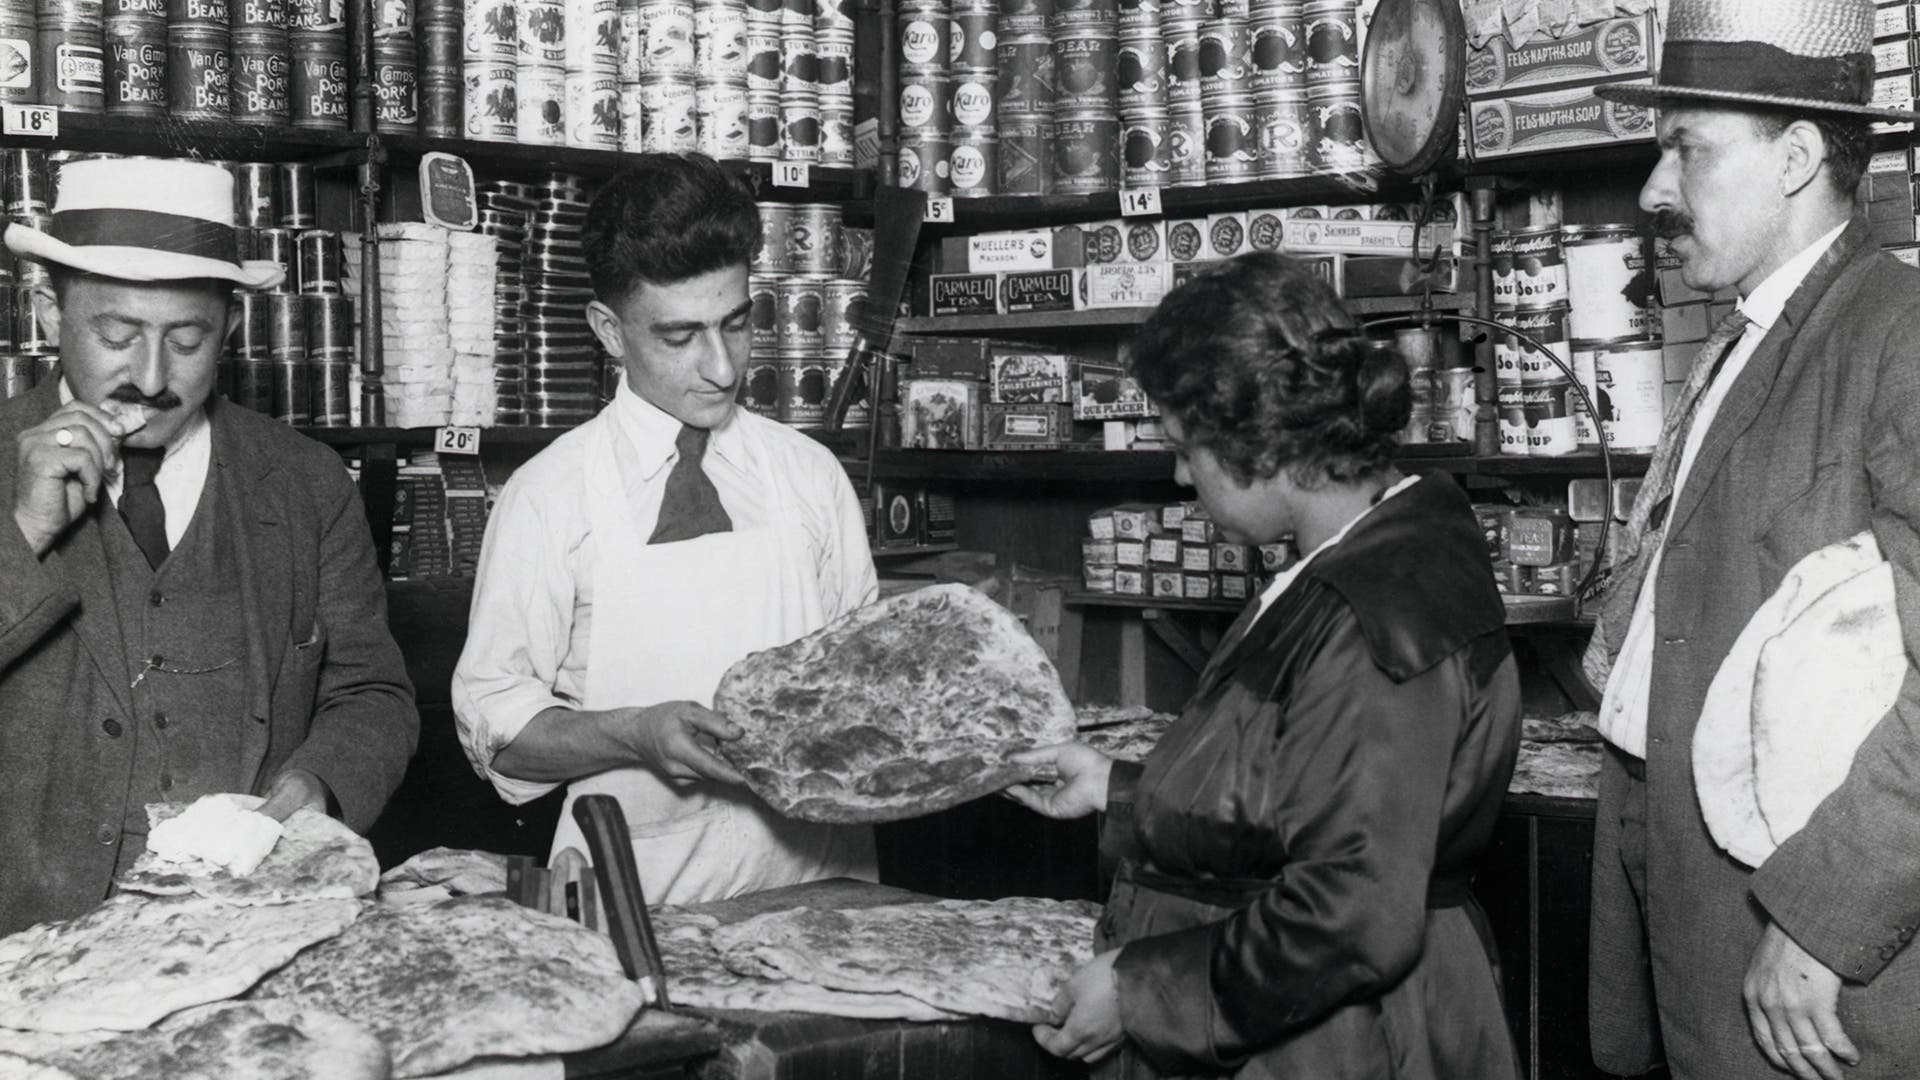 Interior view of a Syrian shop showing customers buying marcouck, circa 1919.